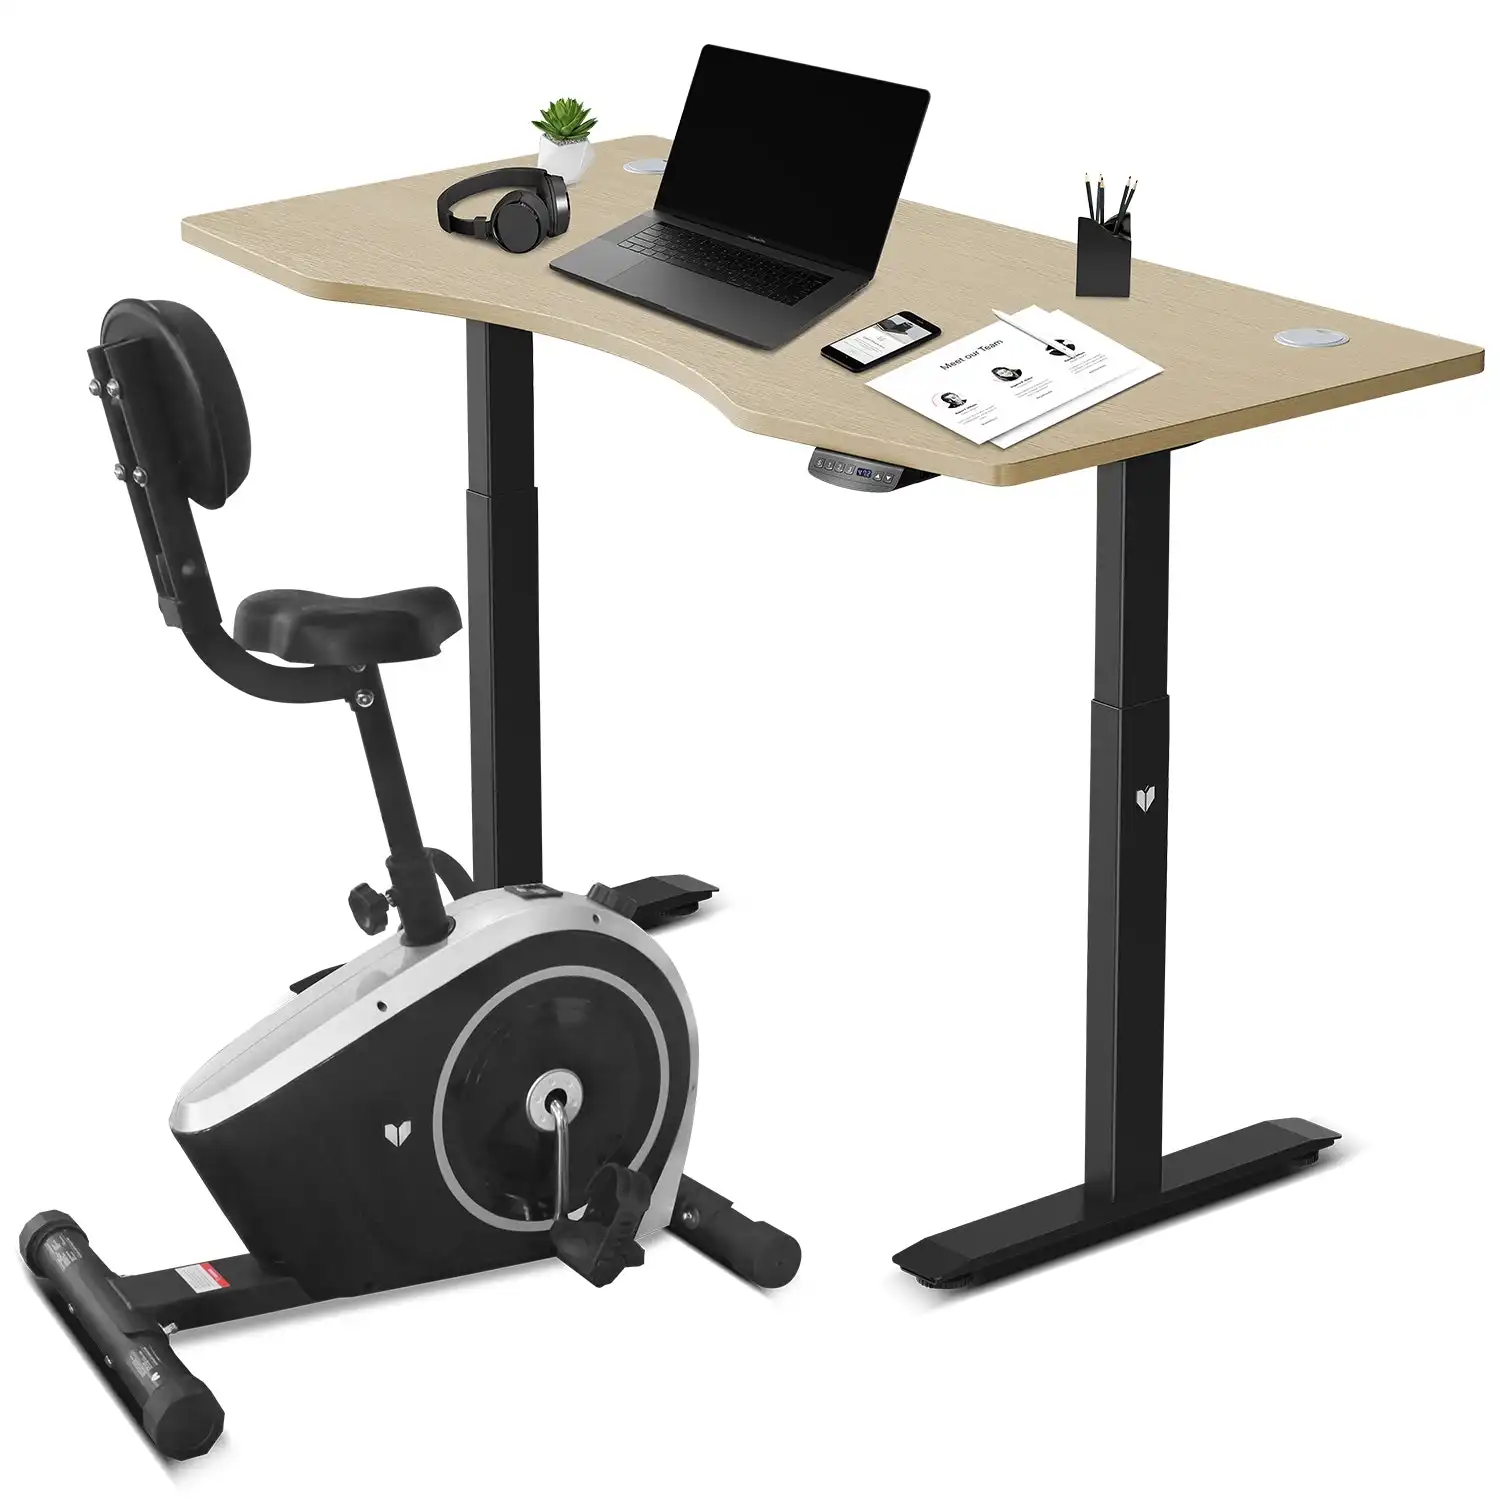 Lifespan Fitness Cyclestation3 Exercise Bike with ErgoDesk Automatic Standing Desk 1500mm in Oak